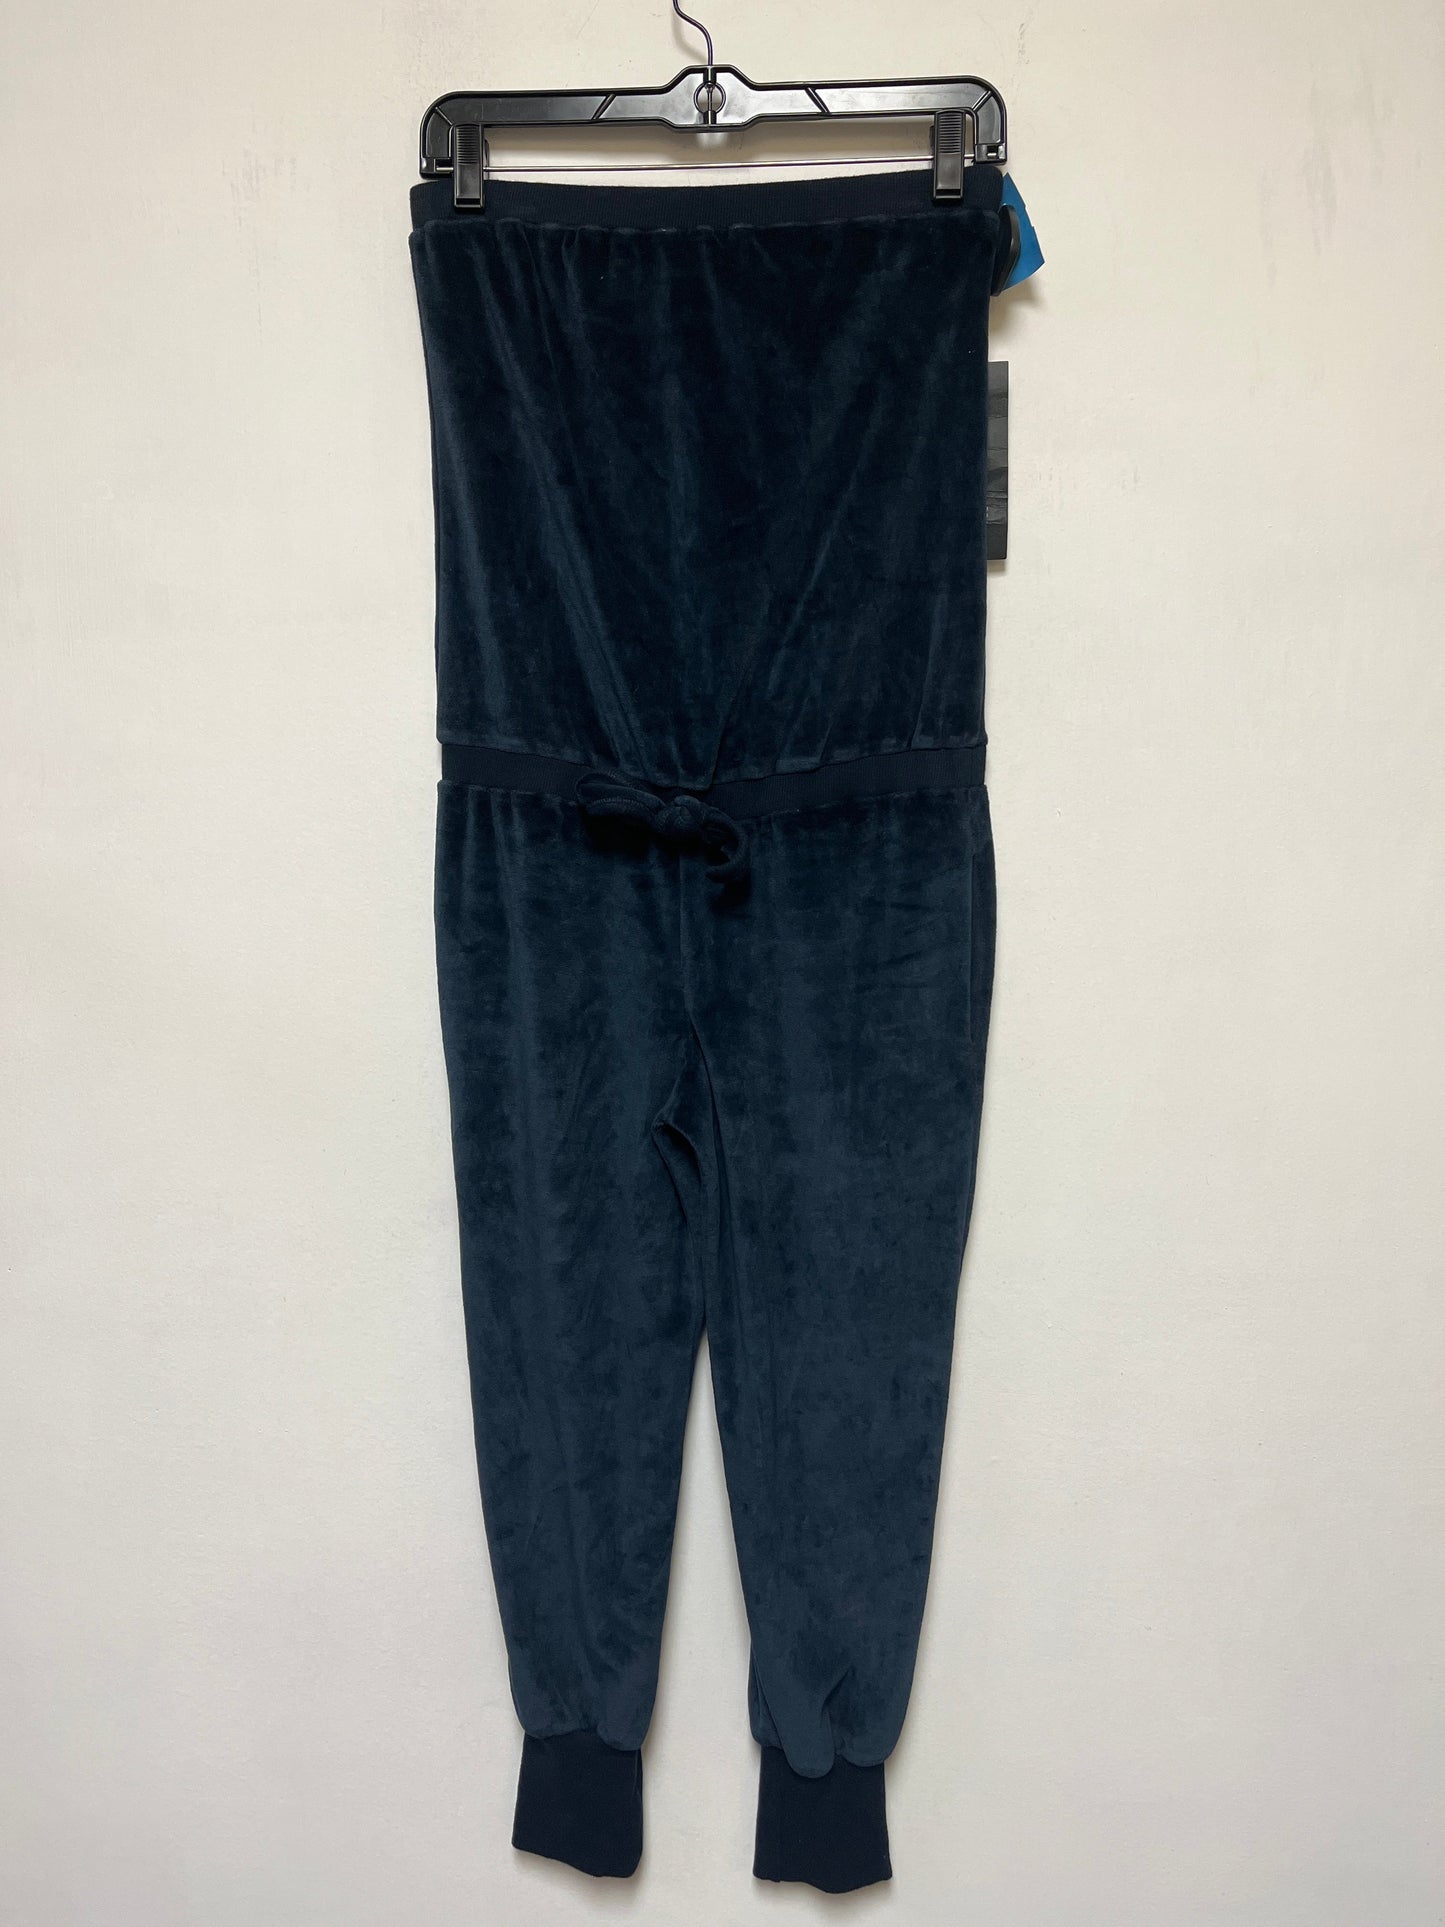 Jumpsuit By Marc By Marc Jacobs  Size: S